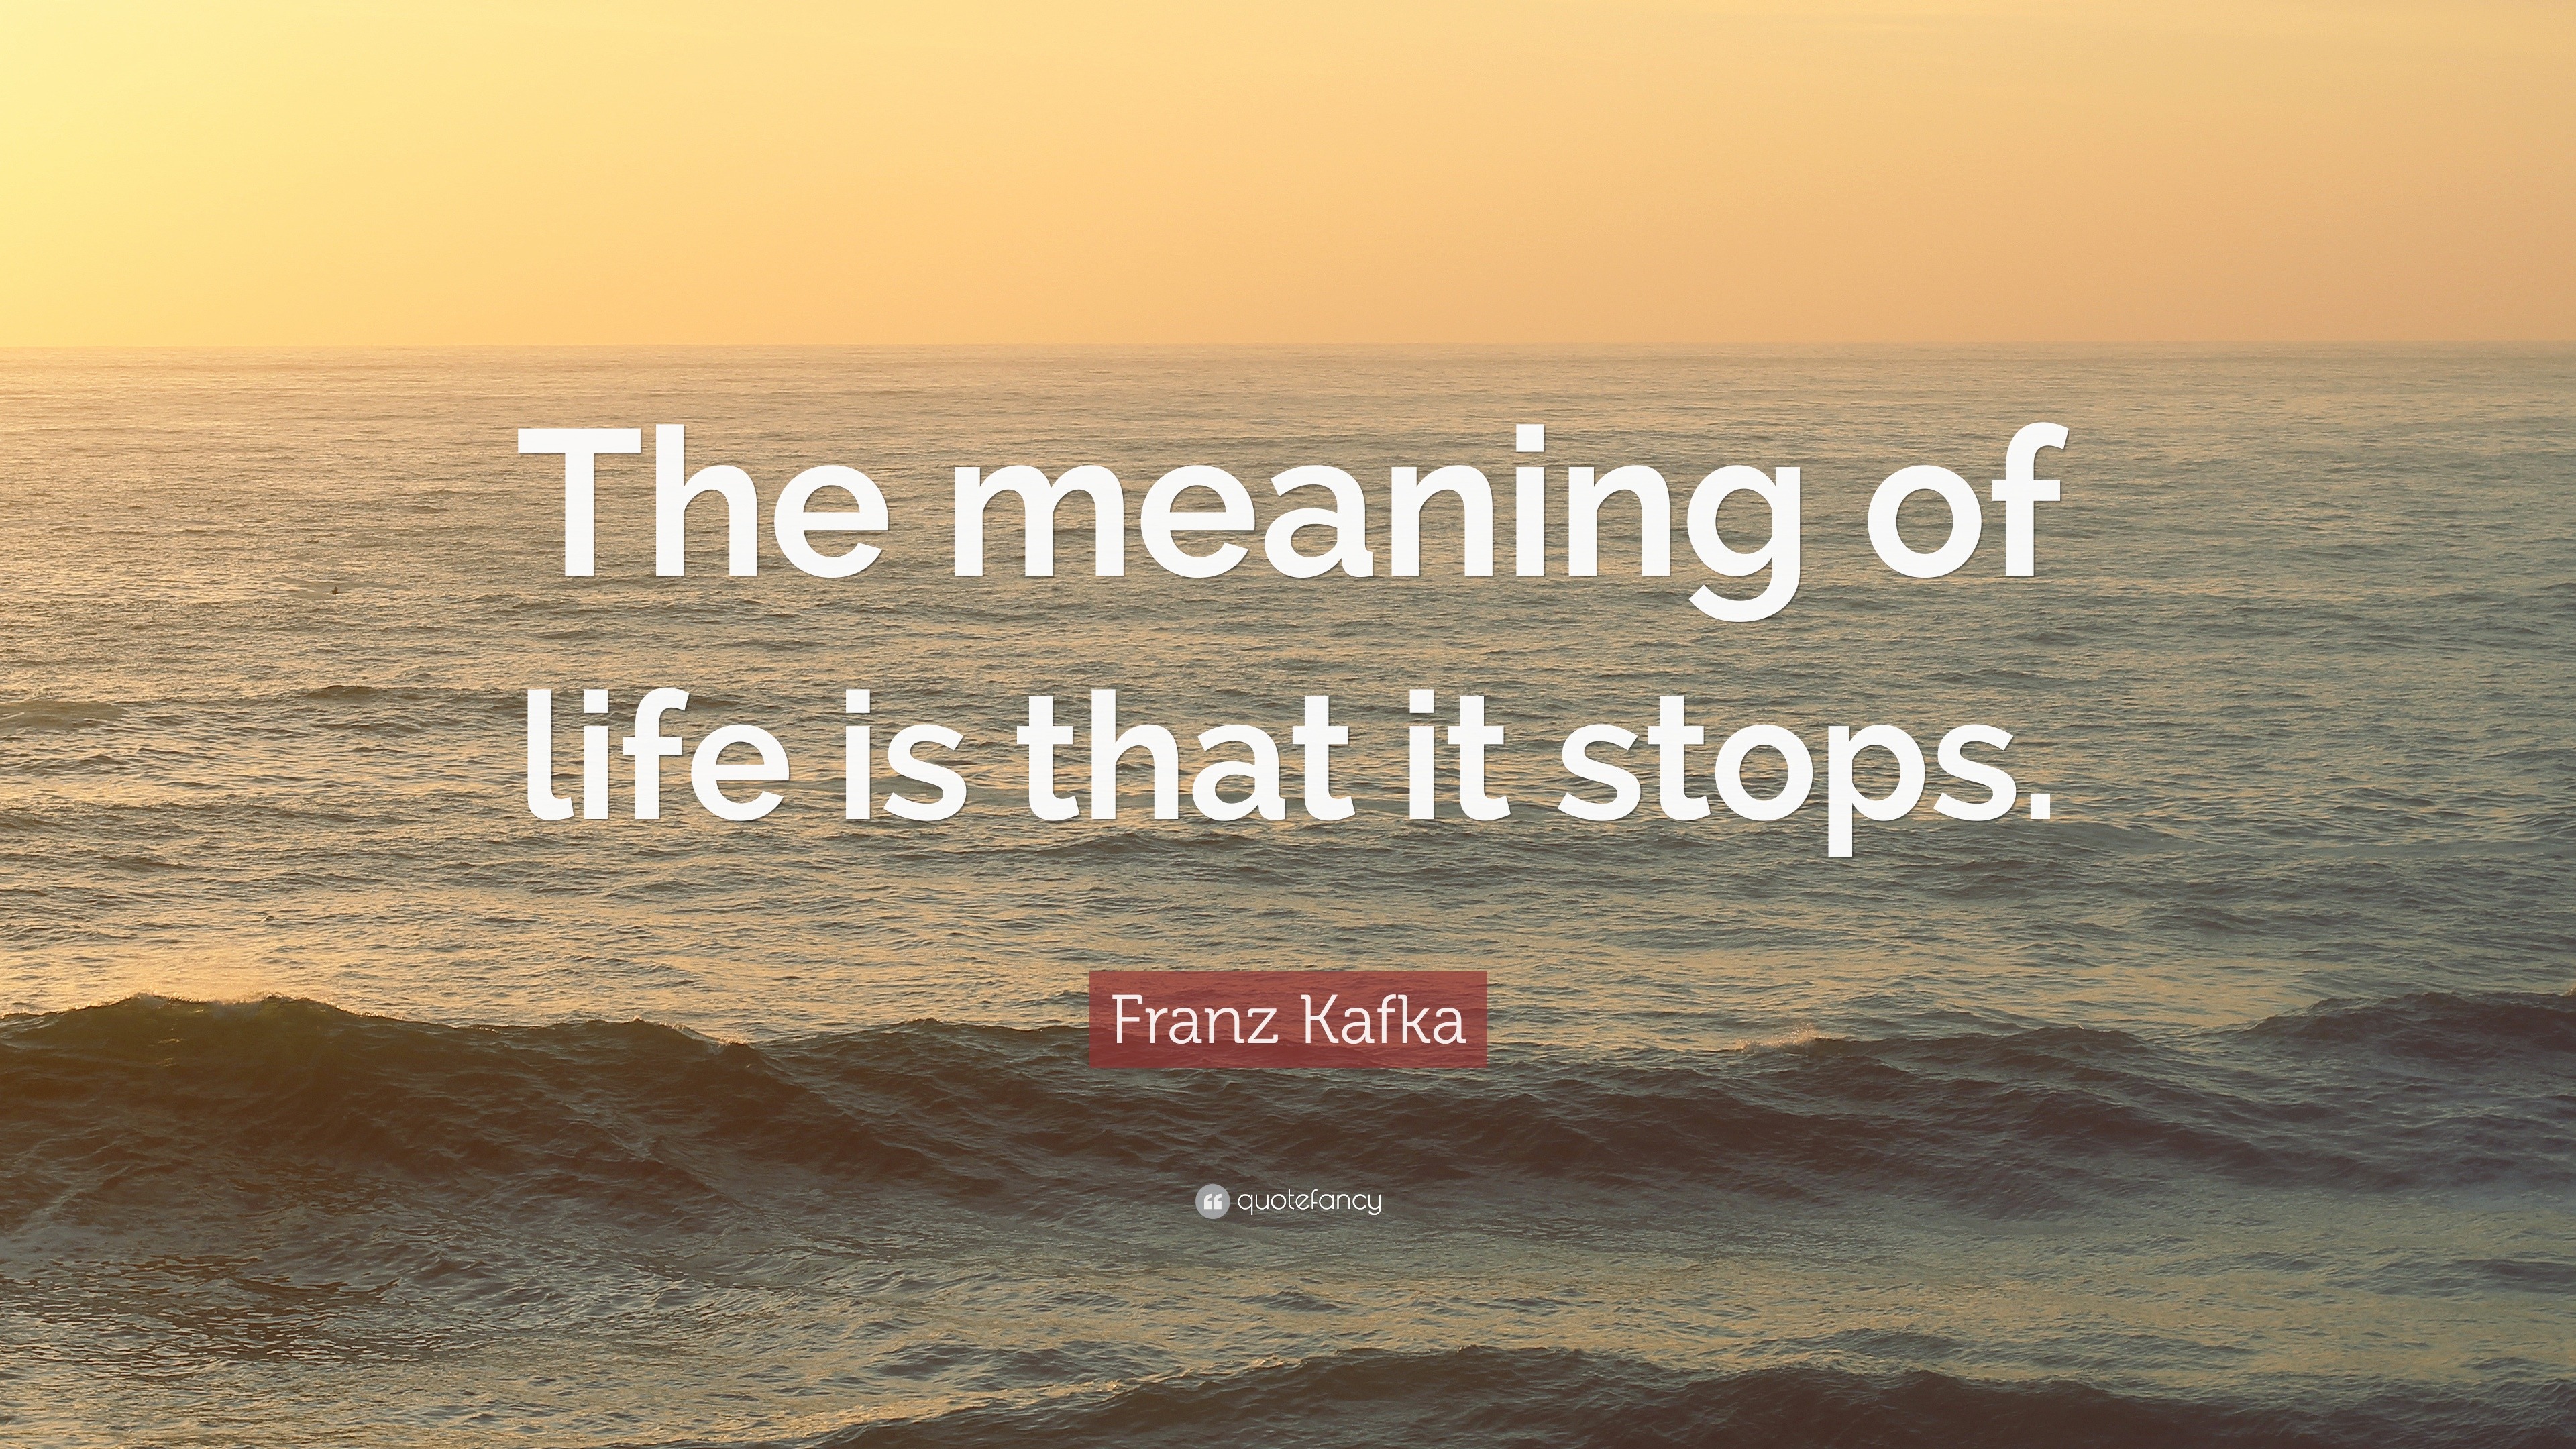 Franz Kafka Quote  The meaning  of life  is that it stops 